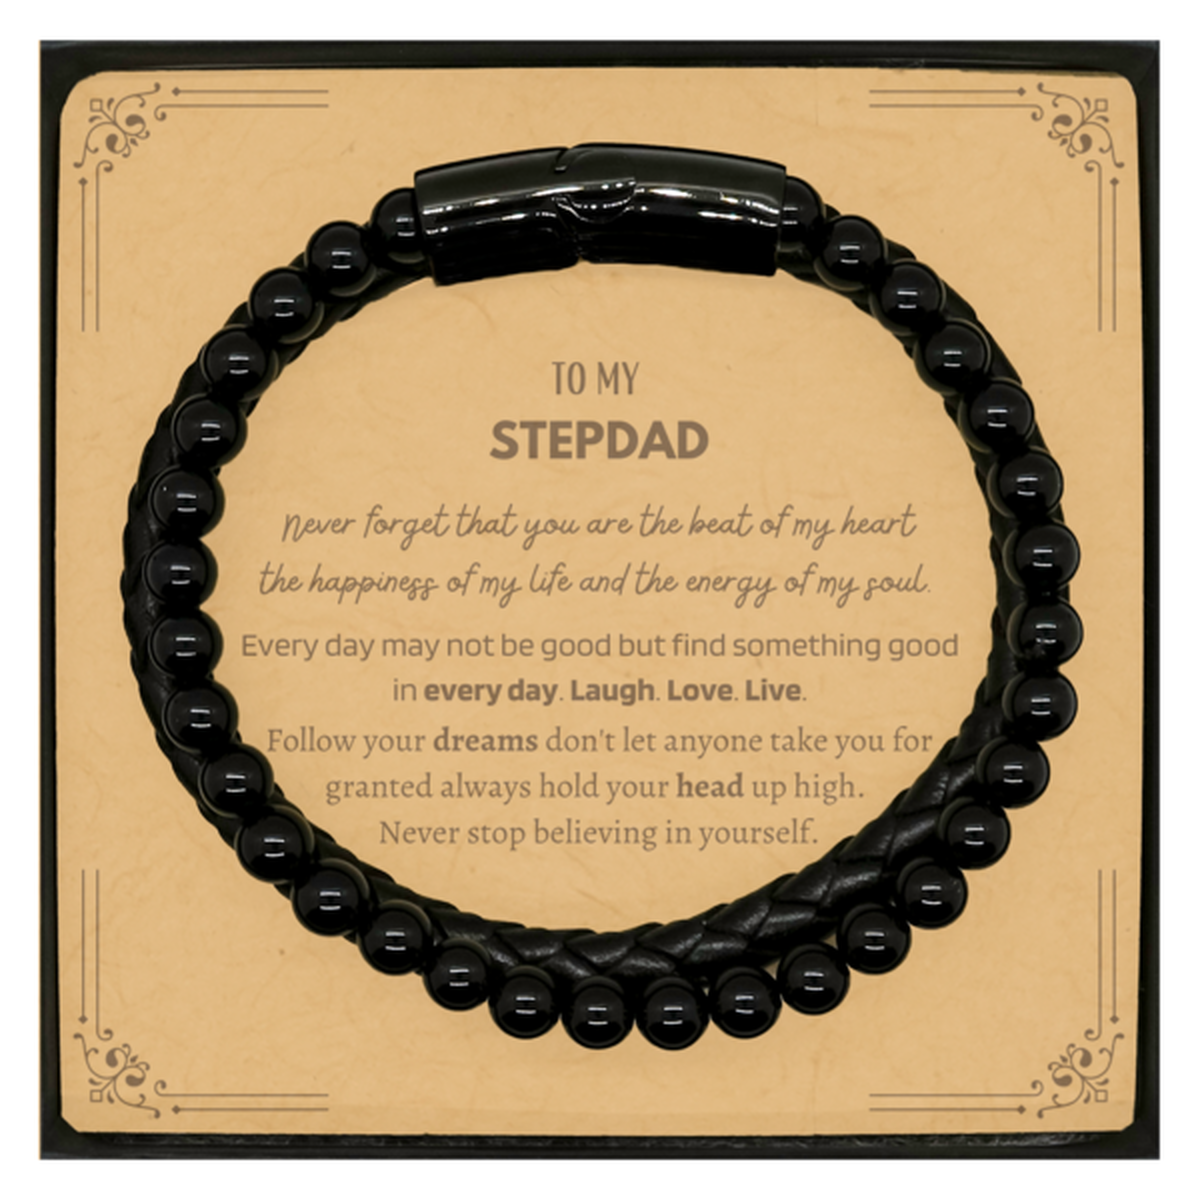 To My Stepdad Message Card Gifts, Christmas Stepdad Stone Leather Bracelets Present, Birthday Unique Motivational For Stepdad, To My Stepdad Never forget that you are the beat of my heart the happiness of my life and the energy of my soul